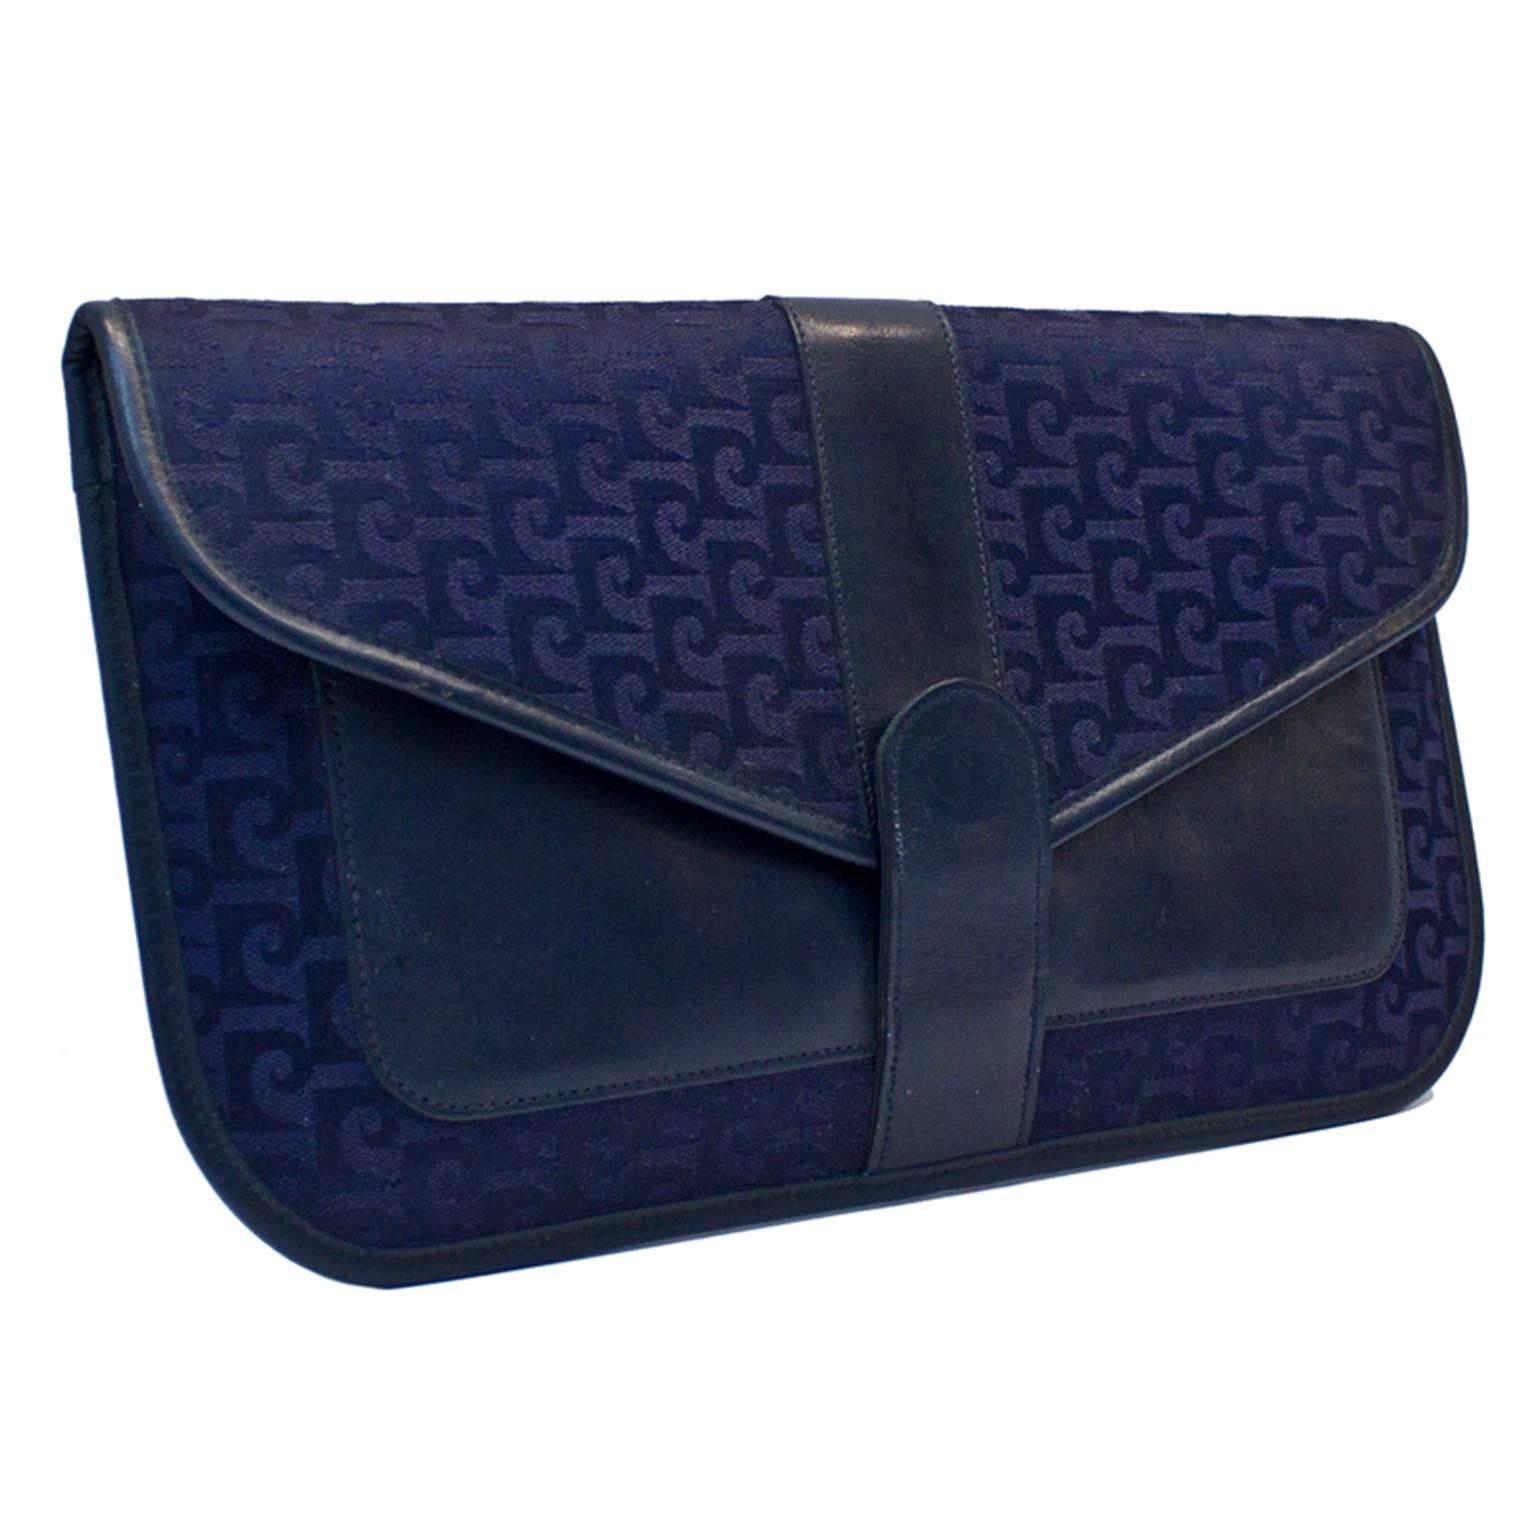 The best Pierre Cardin Navy Logo clutch I have ever found. In excellent vintage condition. Dates from the 1960's. Signature fabric interior. One zipper compartment, leather trim and leather exterior pouch. Snap closure. No sign of wear.

Length